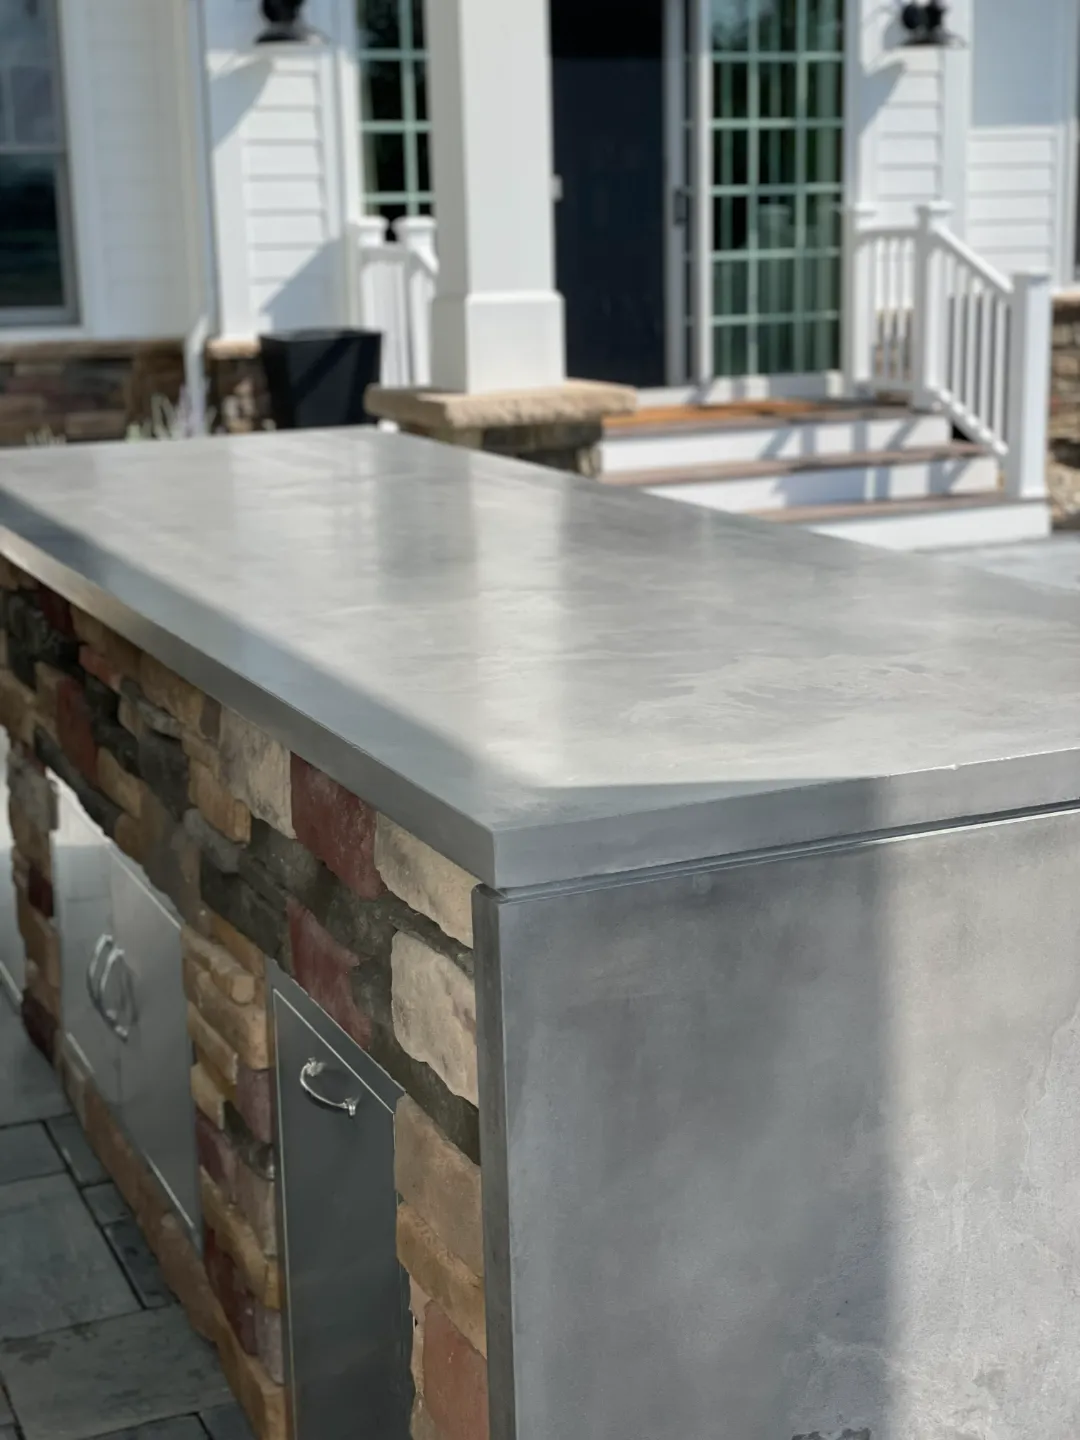 delphos ohio outdoor kitchen project by edgy studios 5